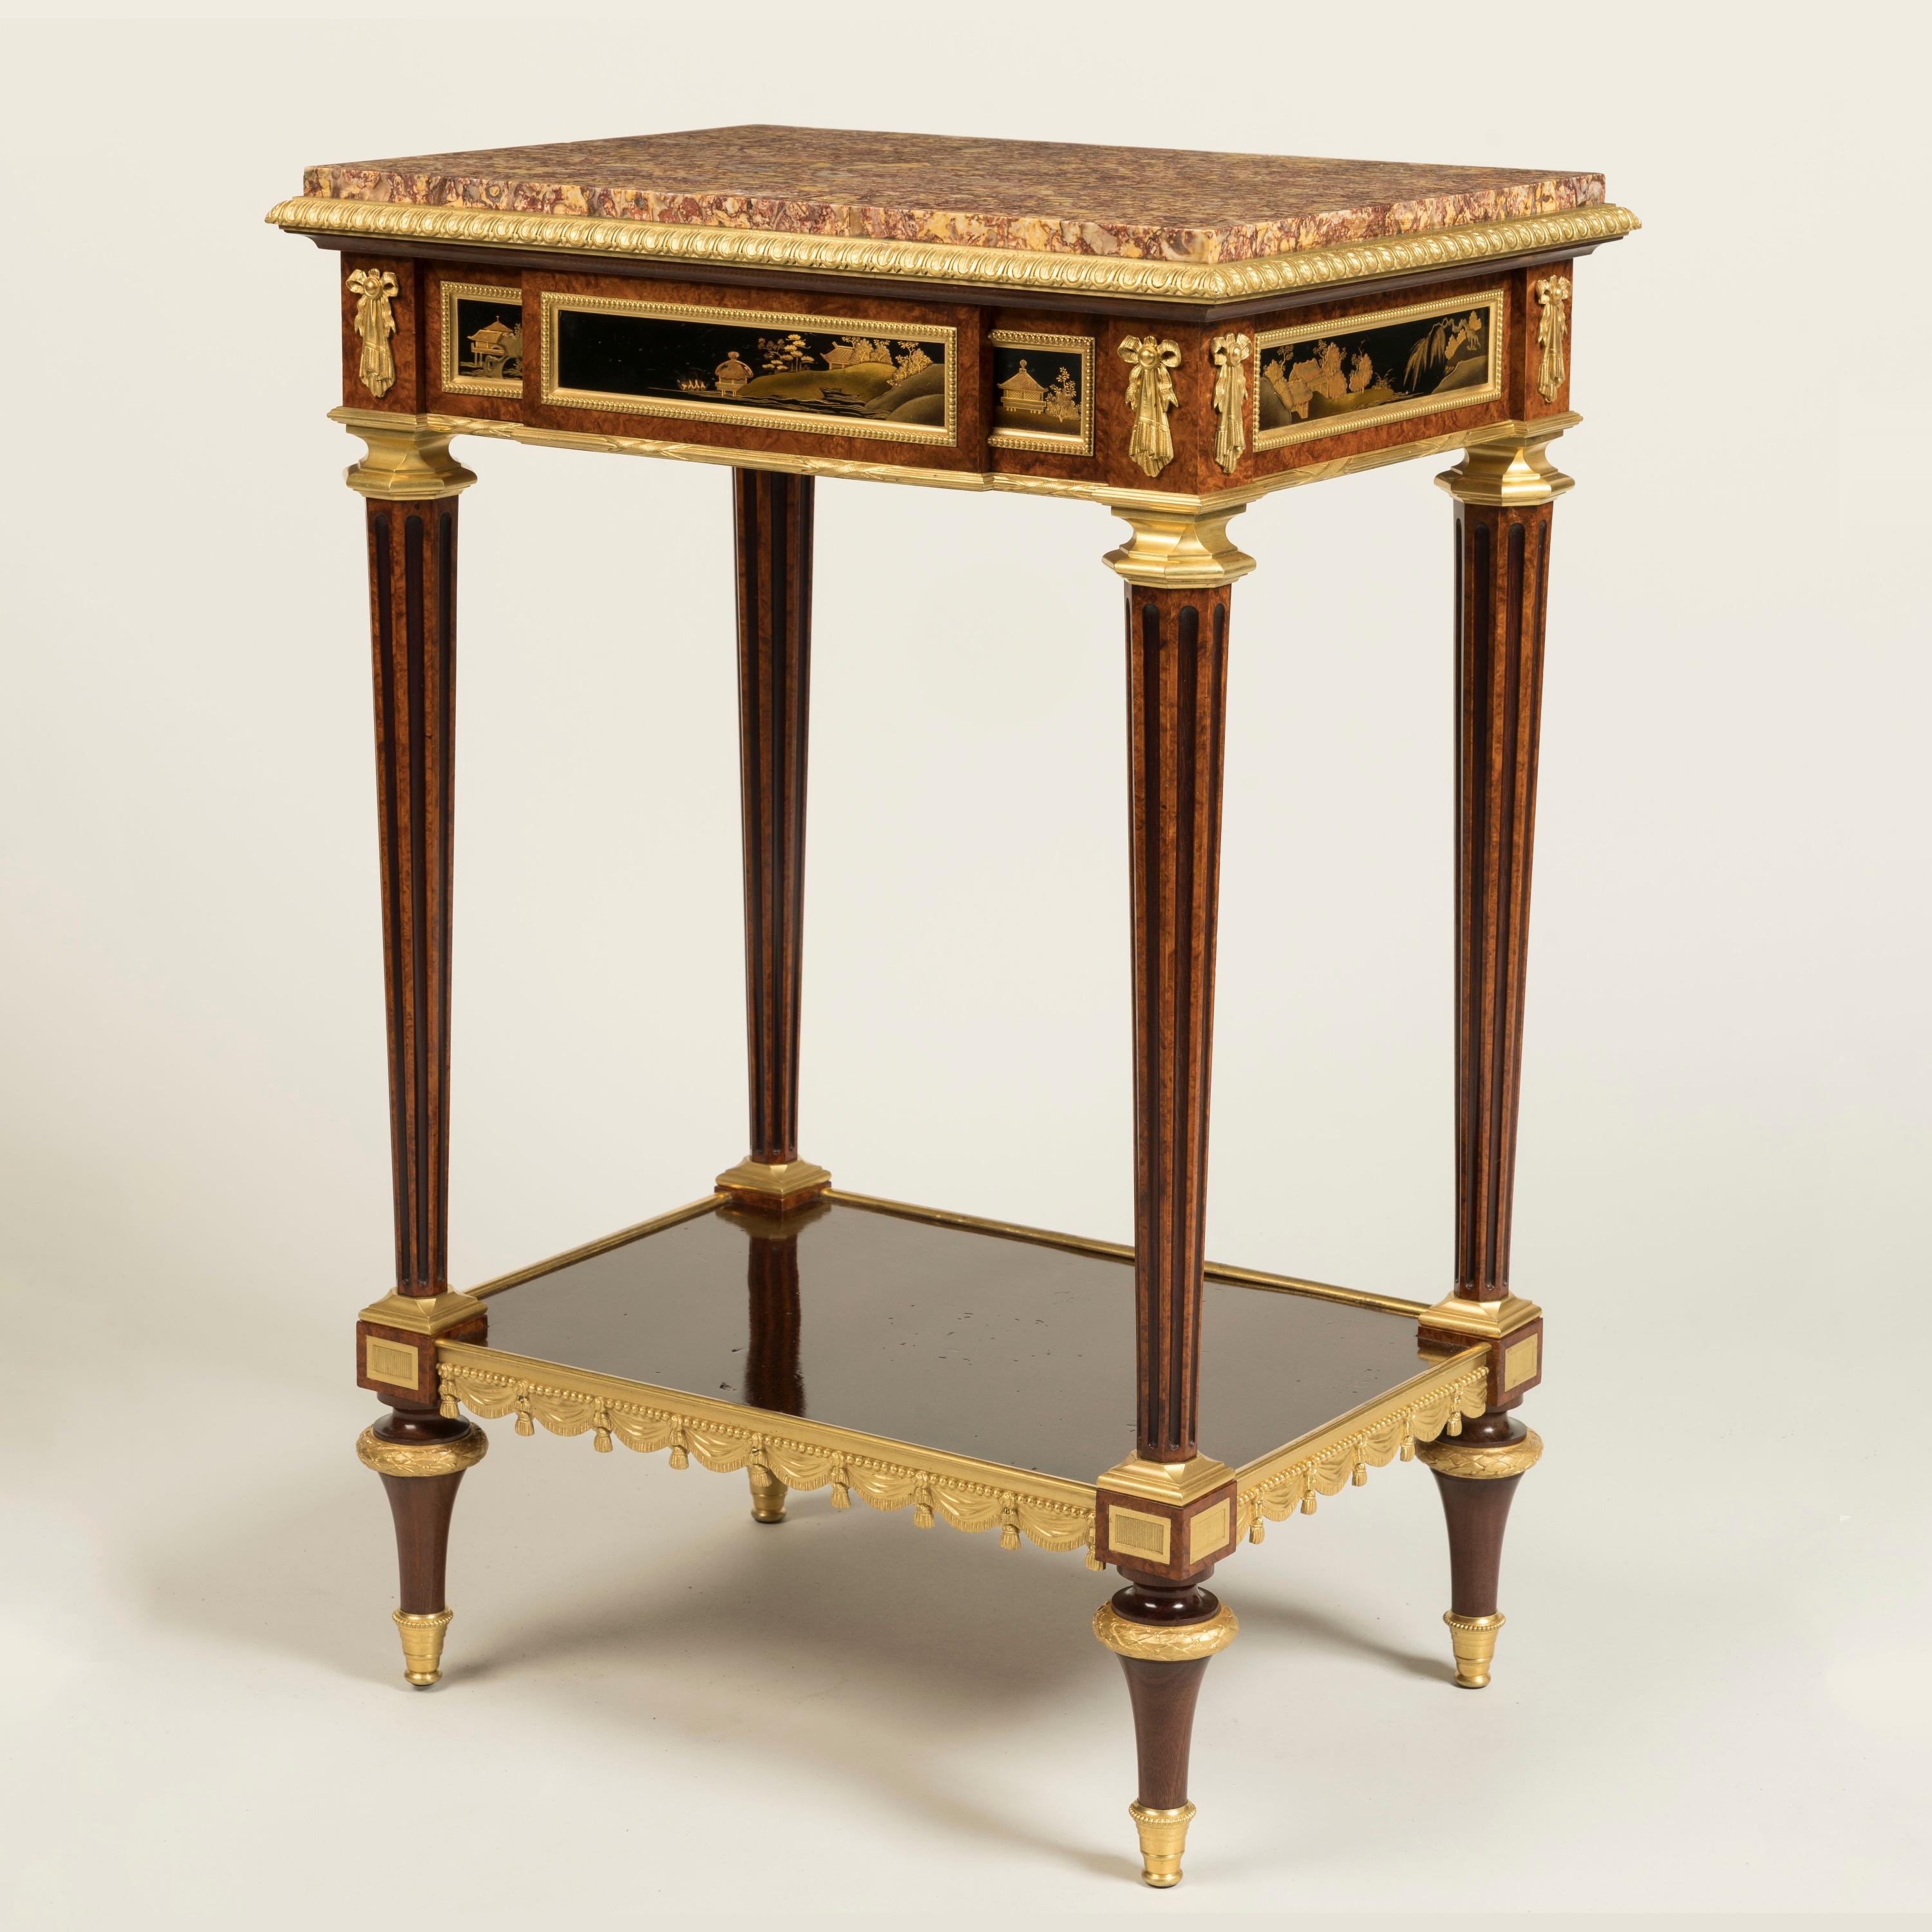 French 19th Century Marble-Top Lacquer Table in the Louis XVI Style by Henry Dasson For Sale